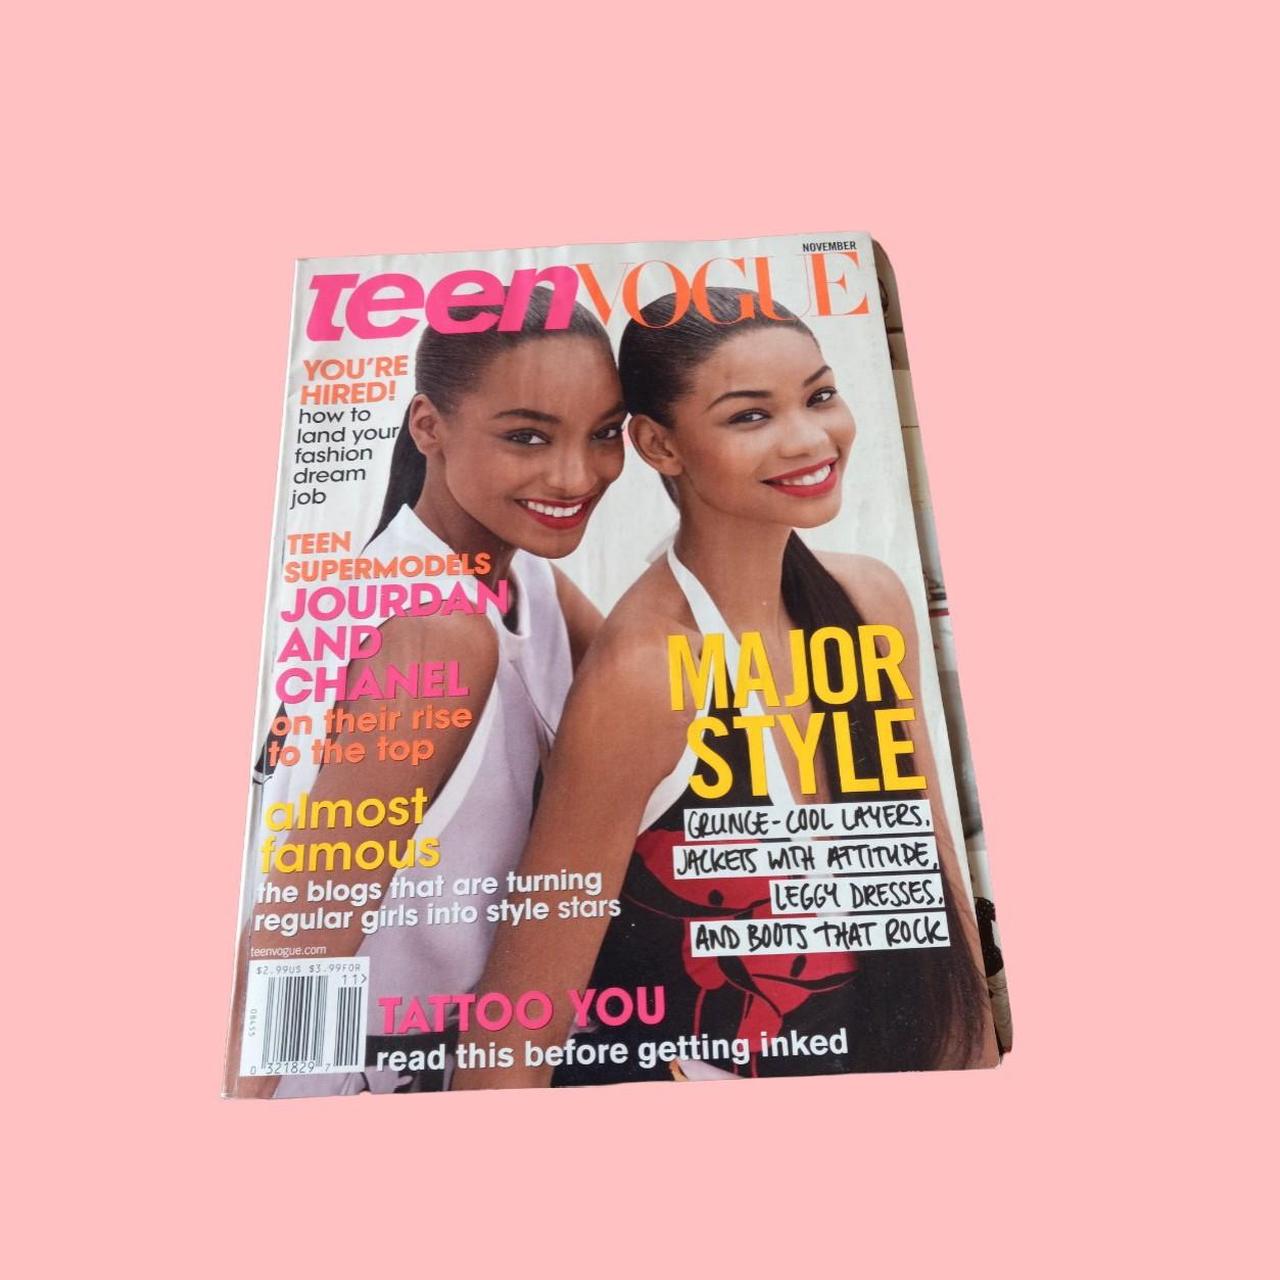 Teen Vogue Put 3 Very Special Models on a Cover — and Other Magazines  Should Take Note